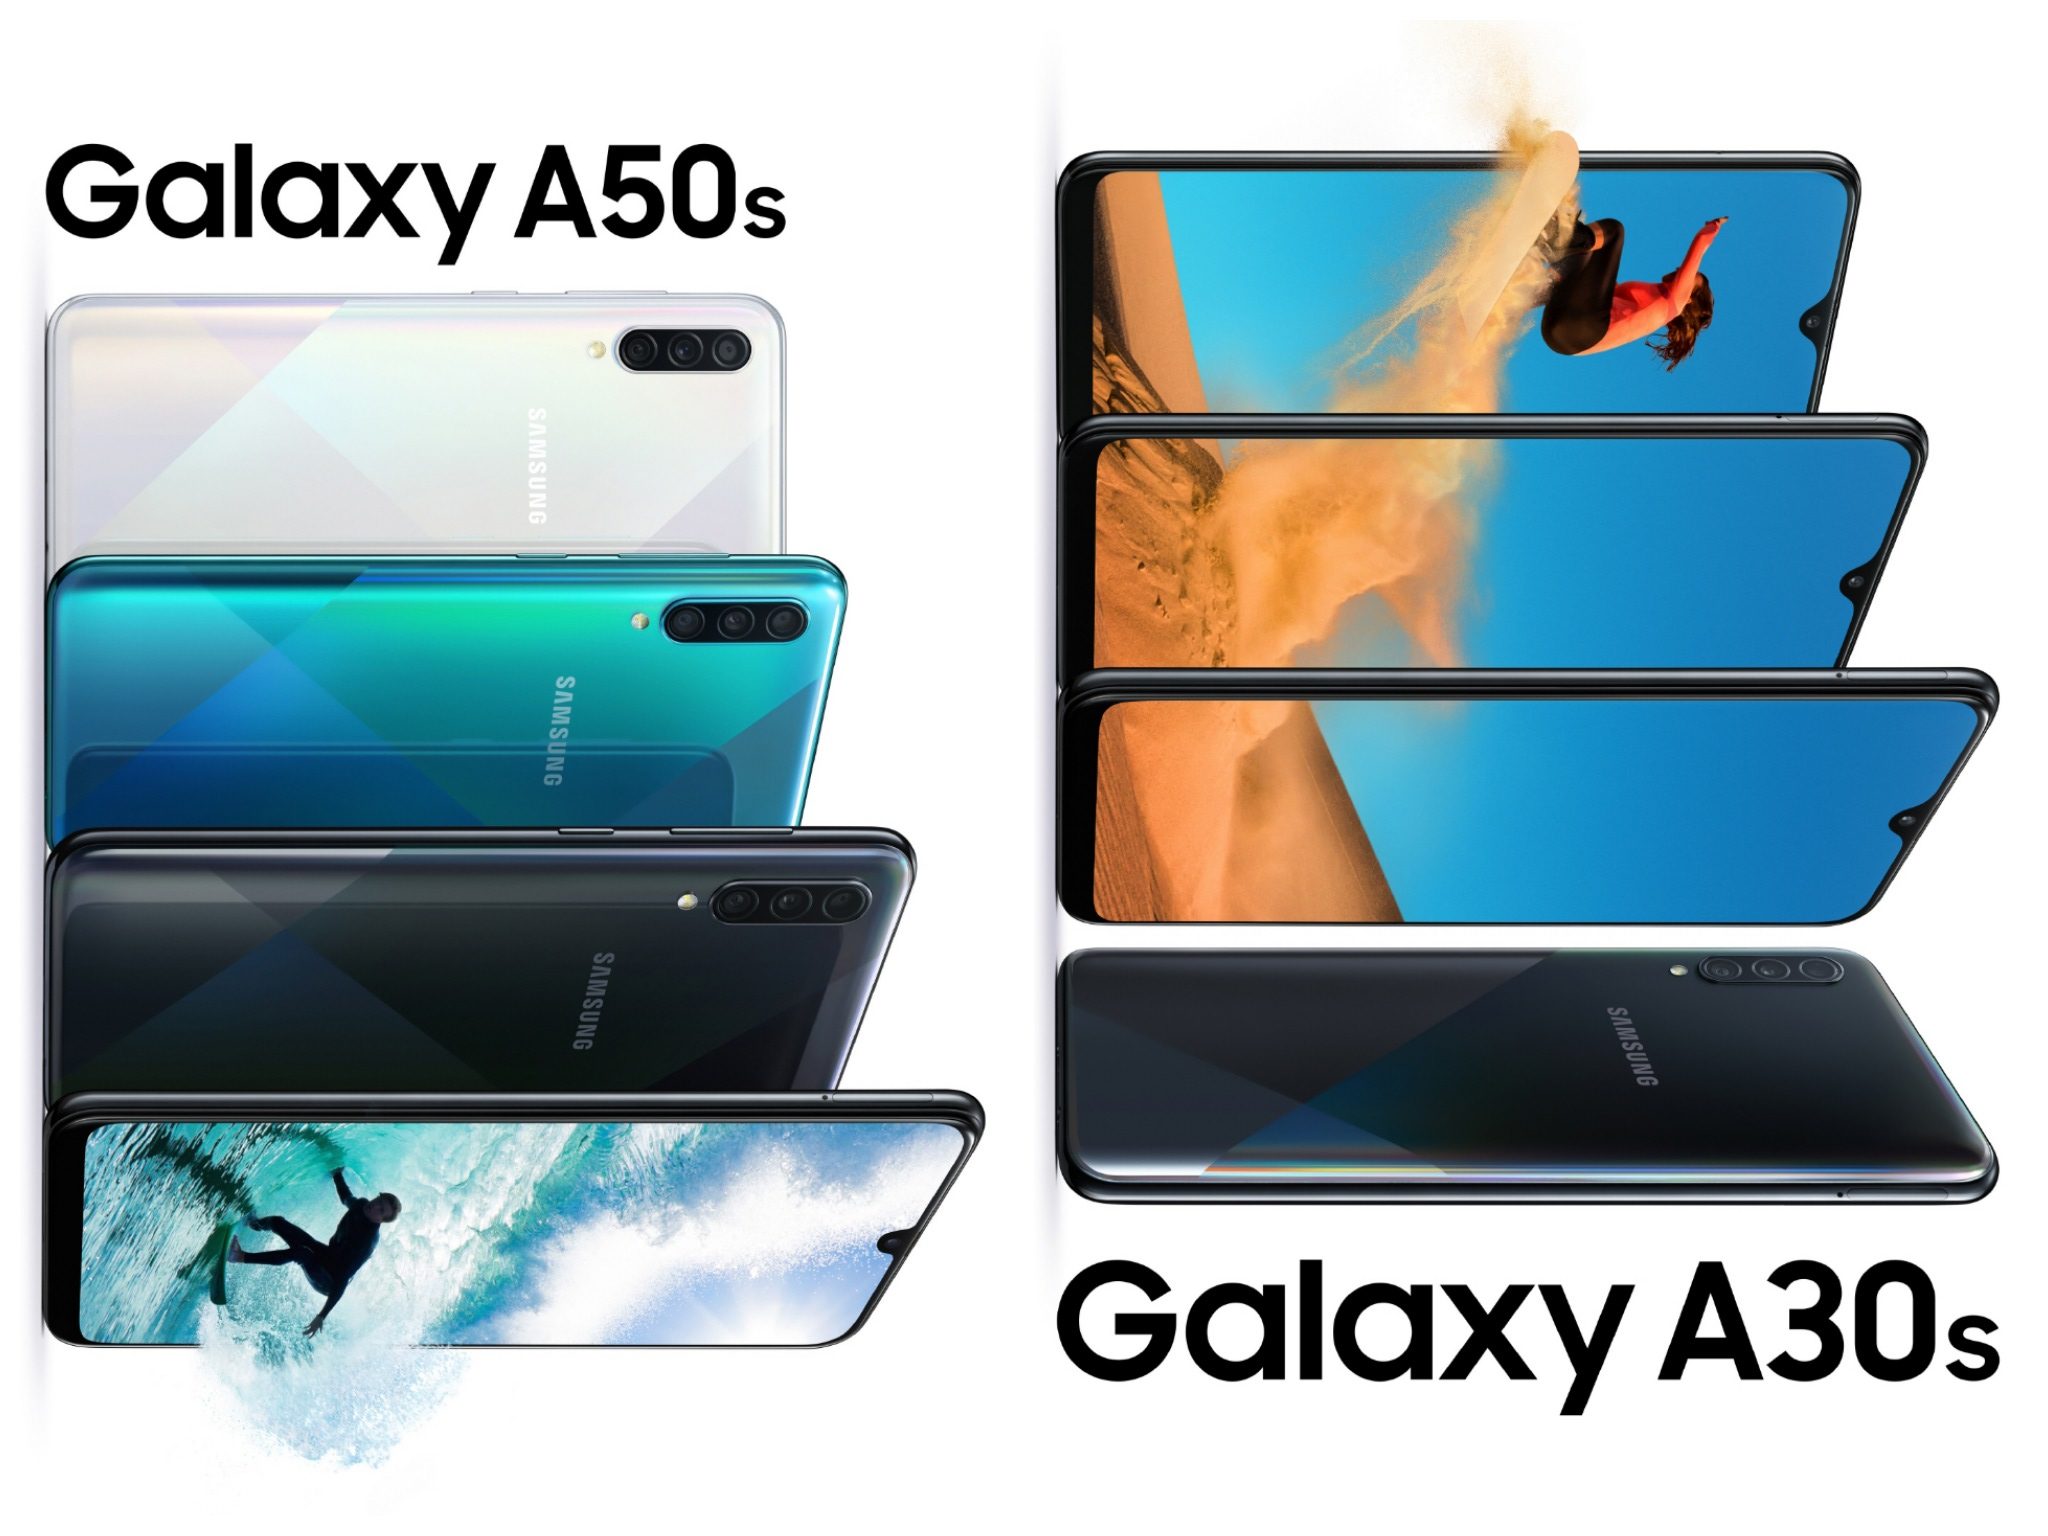 Samsung Galaxy A50s and Galaxy A30s Specs and Price - Dignited